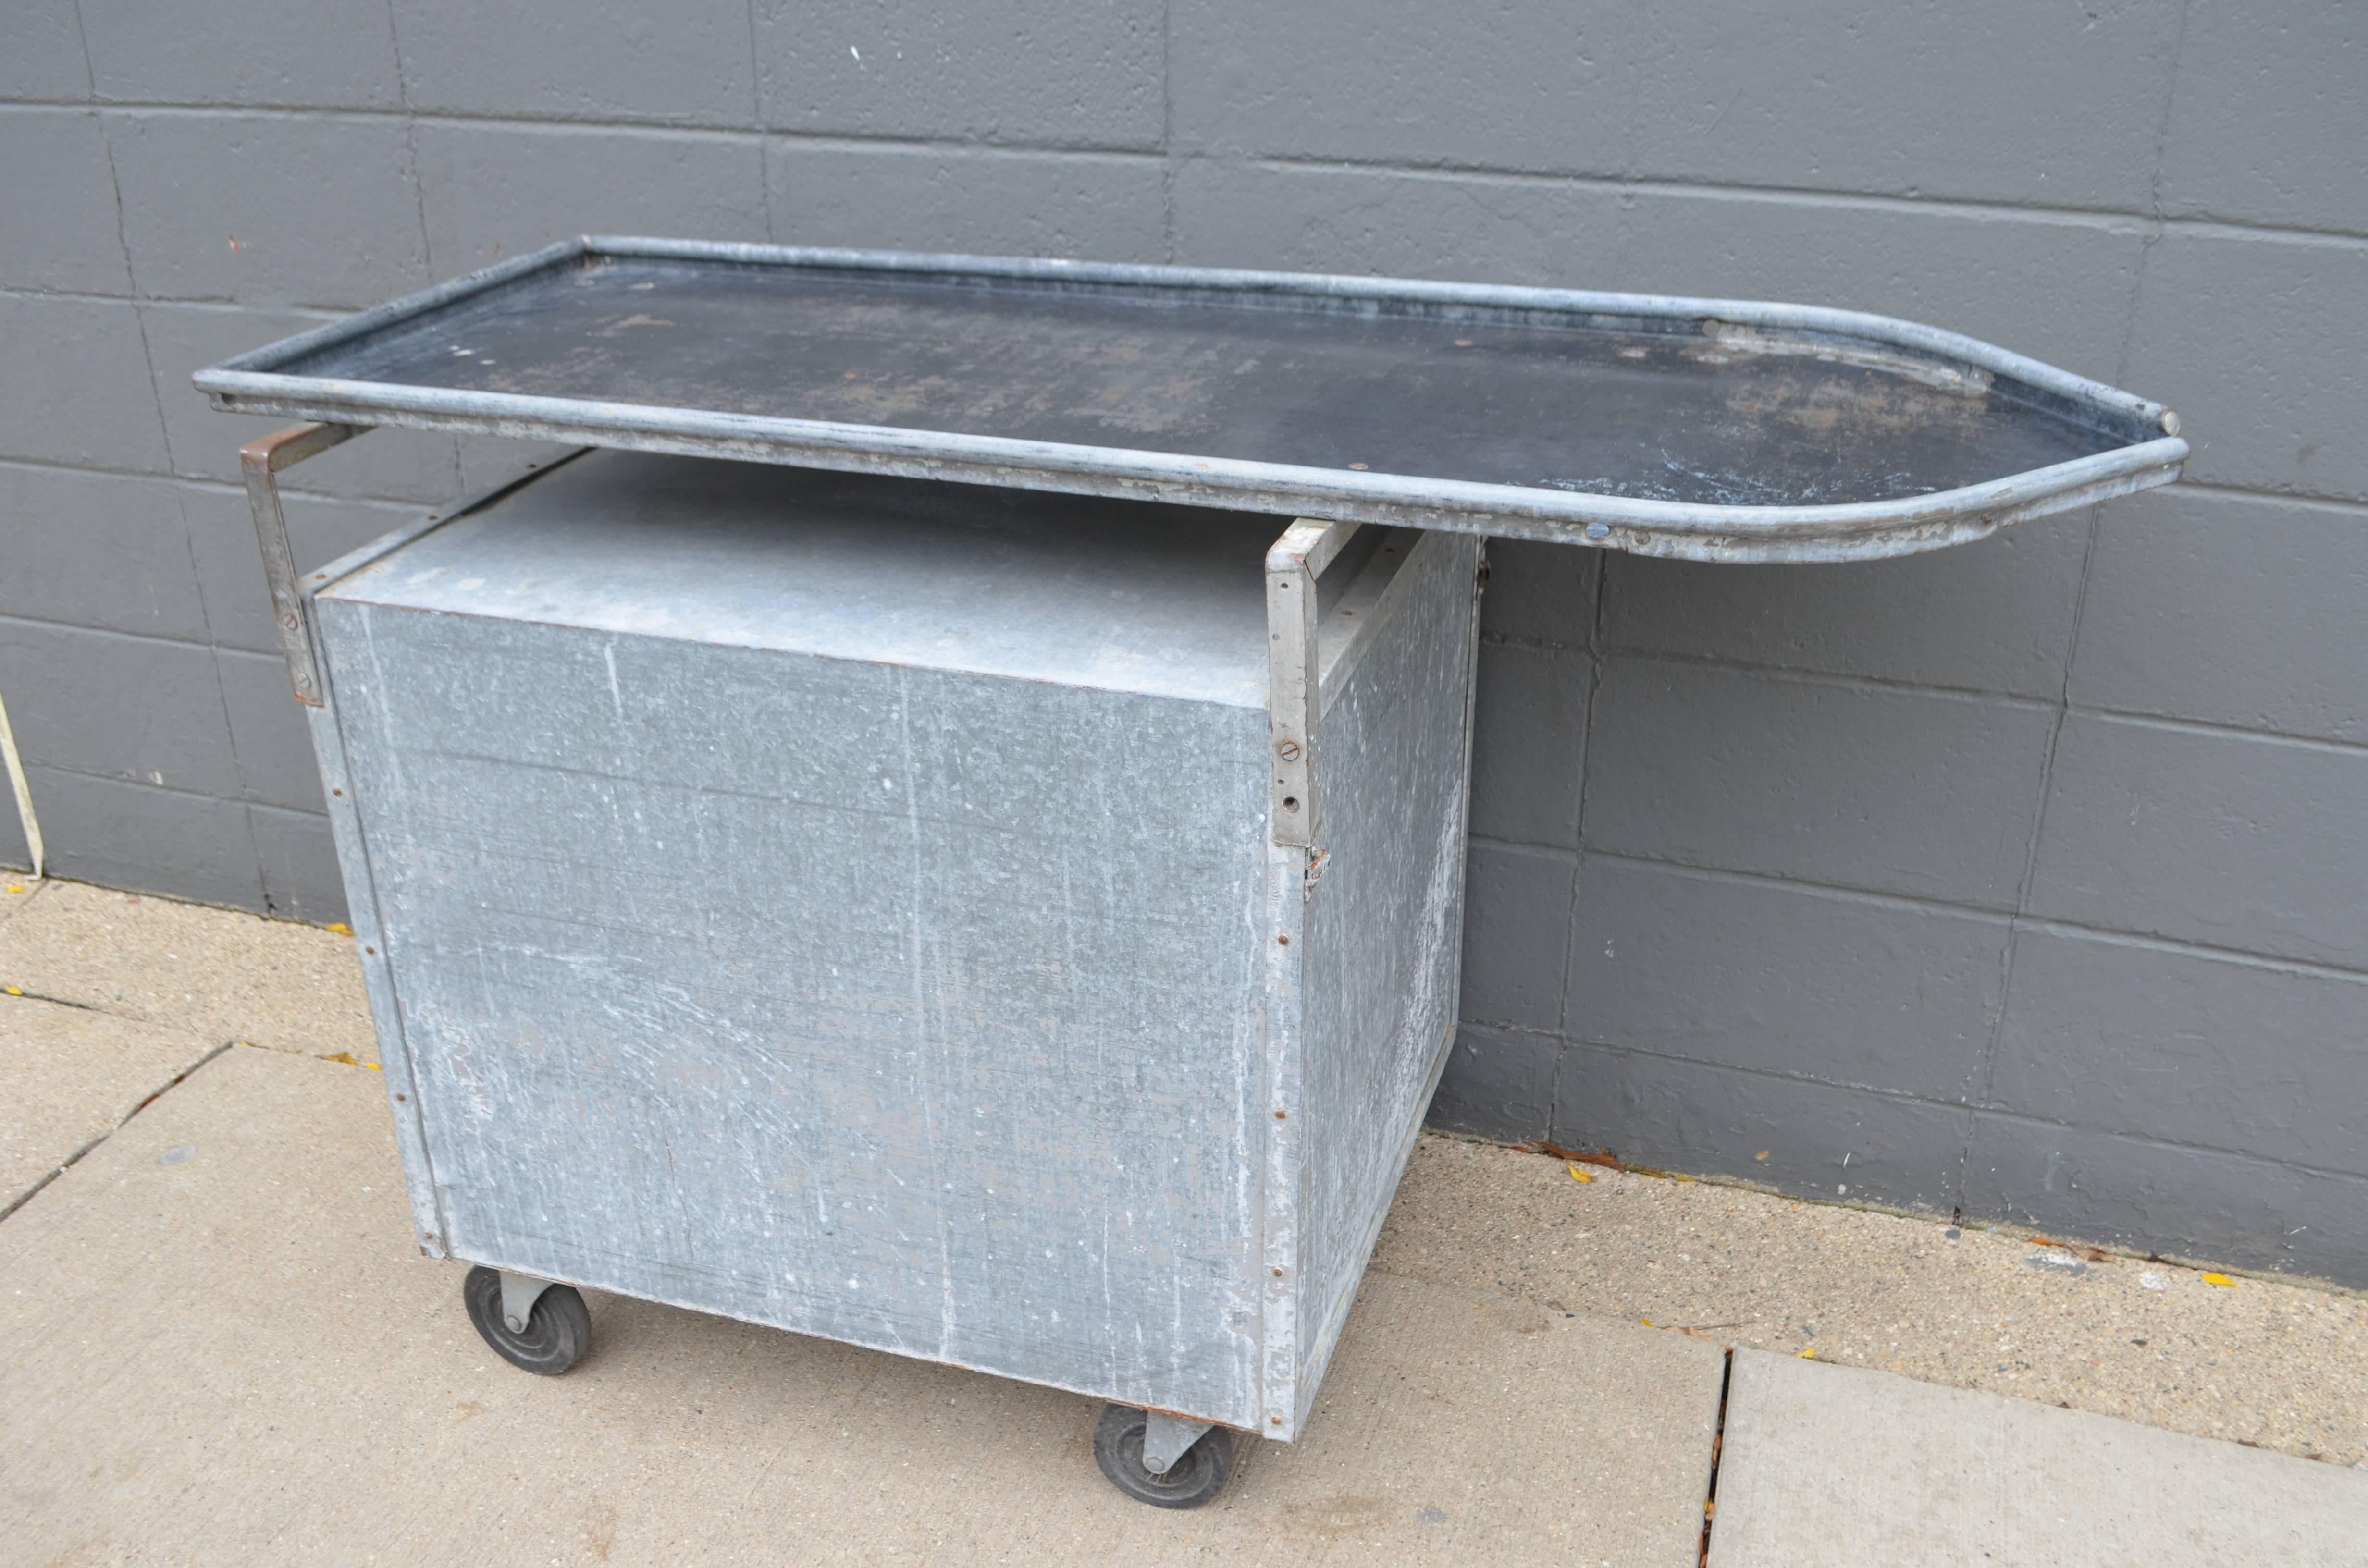 Galvanized veterinary exam table with gated cubby beneath has been thoroughly cleaned and sealed with clear acrylic. Makes multipurpose, portable bar with the bottles stored below decks. A potting table with smaller gardening tools, gloves, shoes,